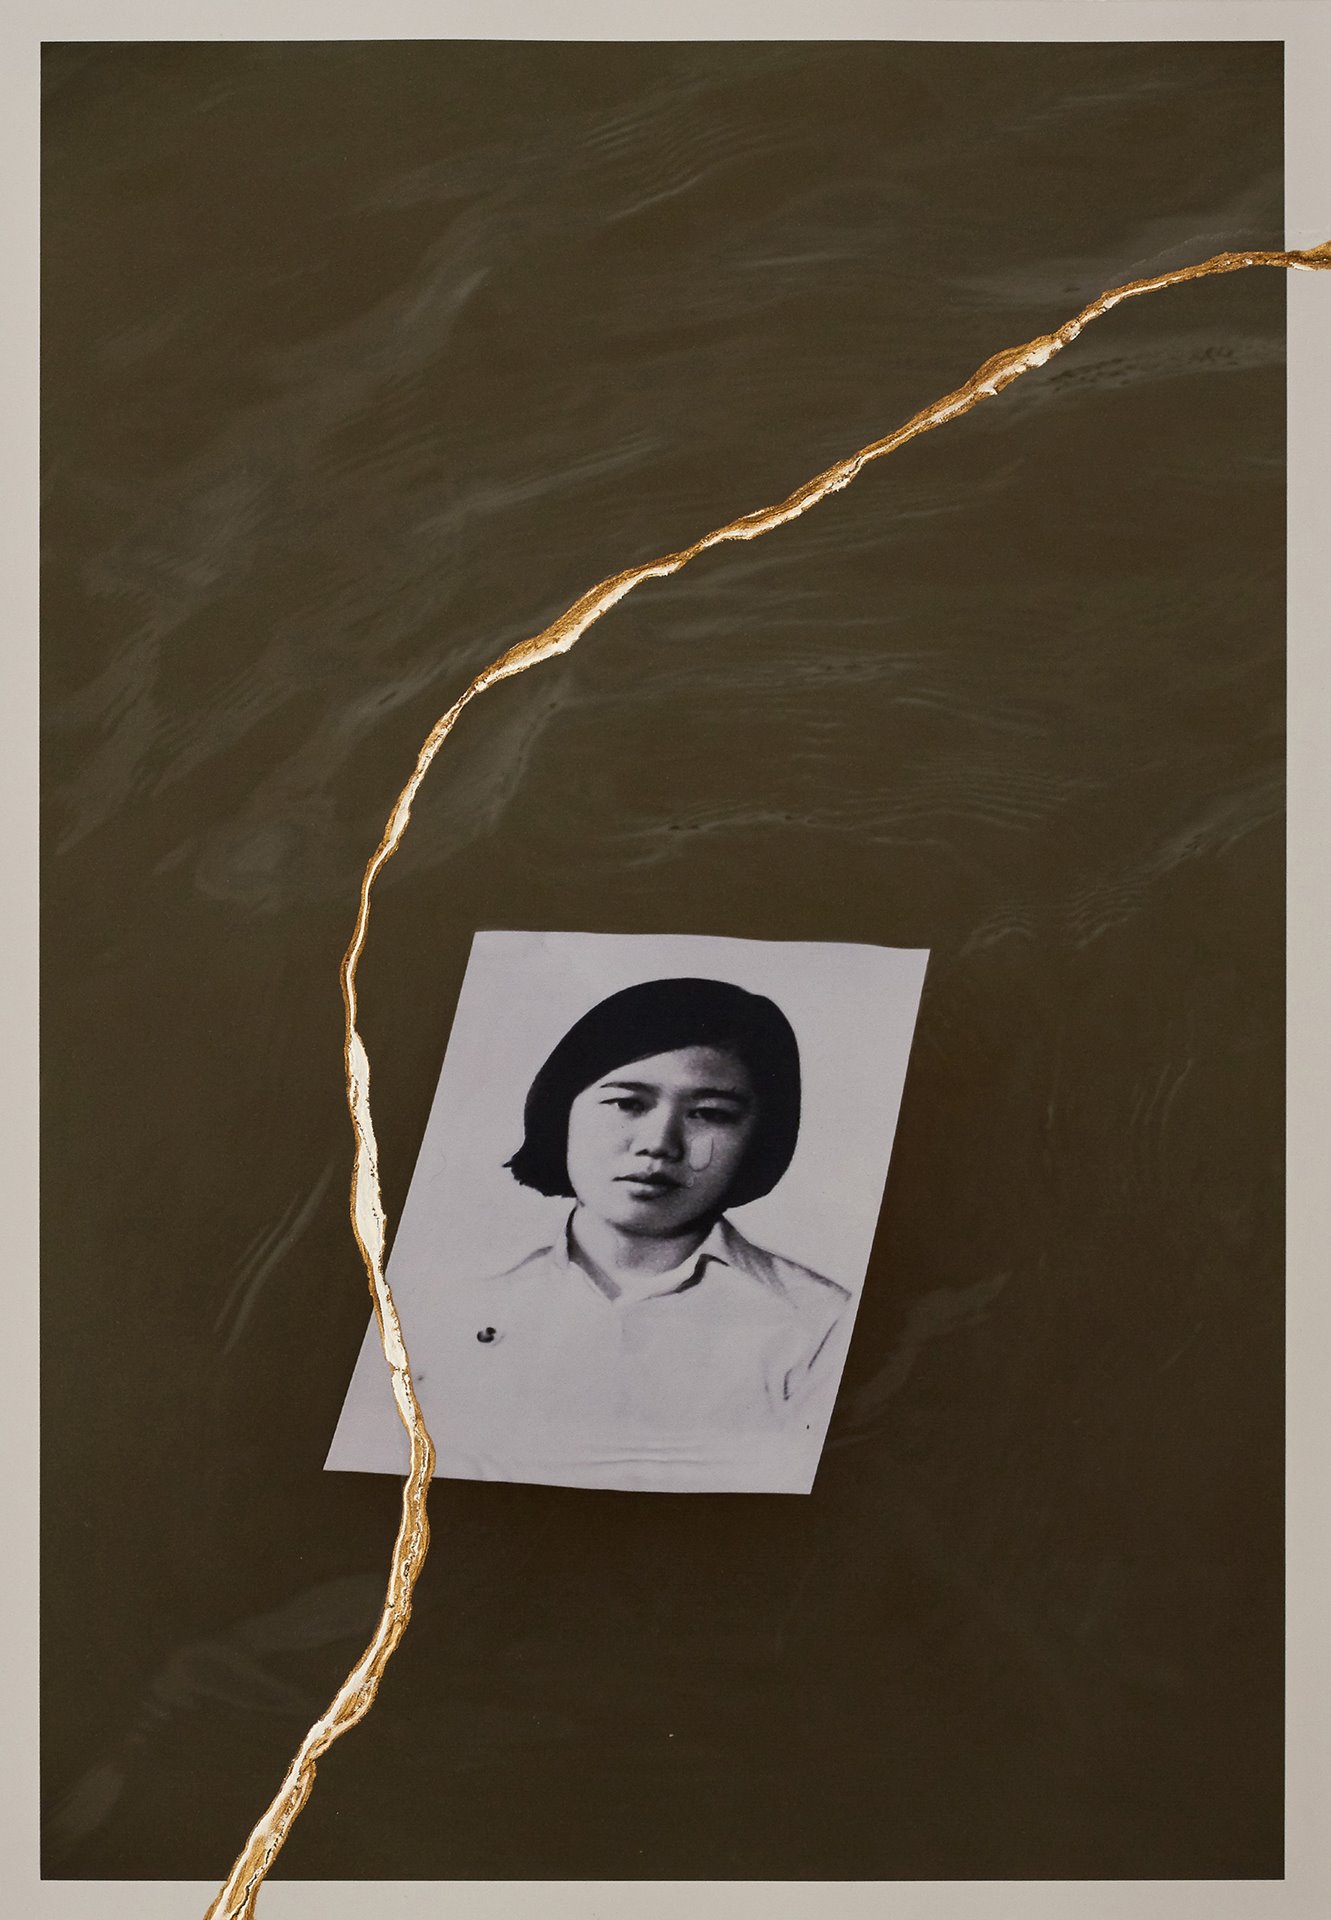 <p>A photograph of Wimonwan Rungthongbaisuri, one of the students killed in the 6 October 1976 massacre, in the Chao Phraya River. Many students were forced to retreat to the river and swim across. Some students were shot in the river by police boats, while others drowned.</p>
